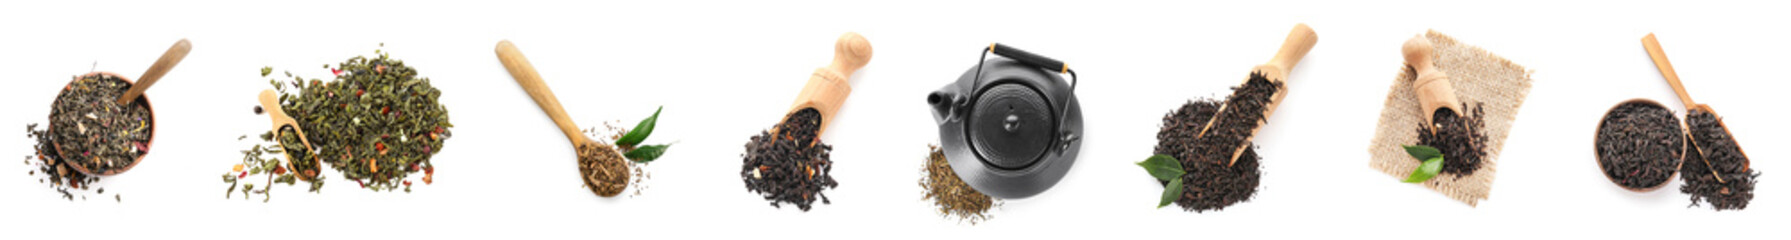 Different types of dry tea on white background, top view